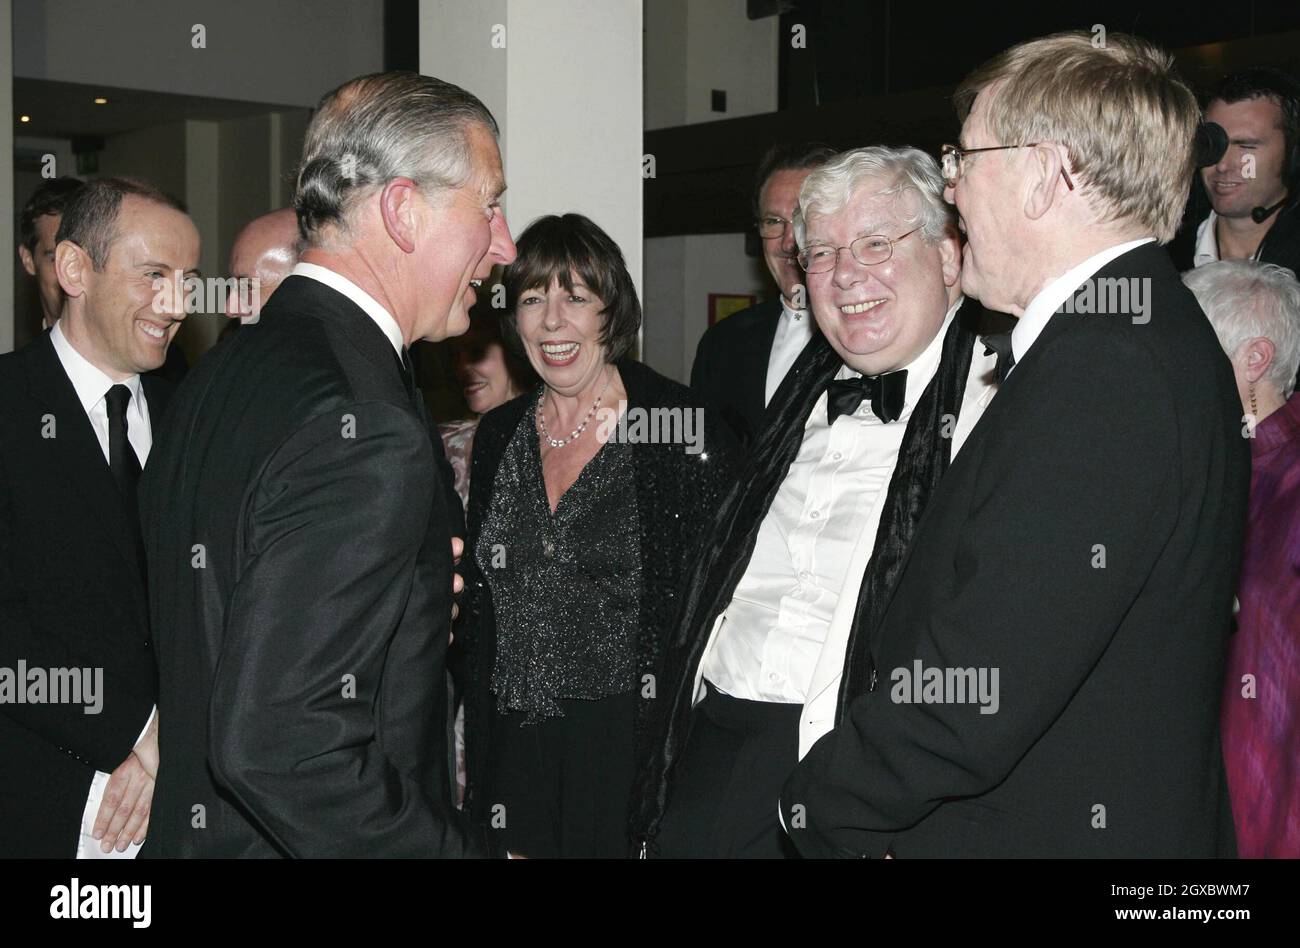 Prince Charles, Prince of Wales meets writer Alan Bennett and actors Richard Griffiths and Frances de la Tour at the premiere of The History Boys in Leicester Square, London on October 2, 2006. Anwar Hussein/EMPICS Entertainment  Stock Photo